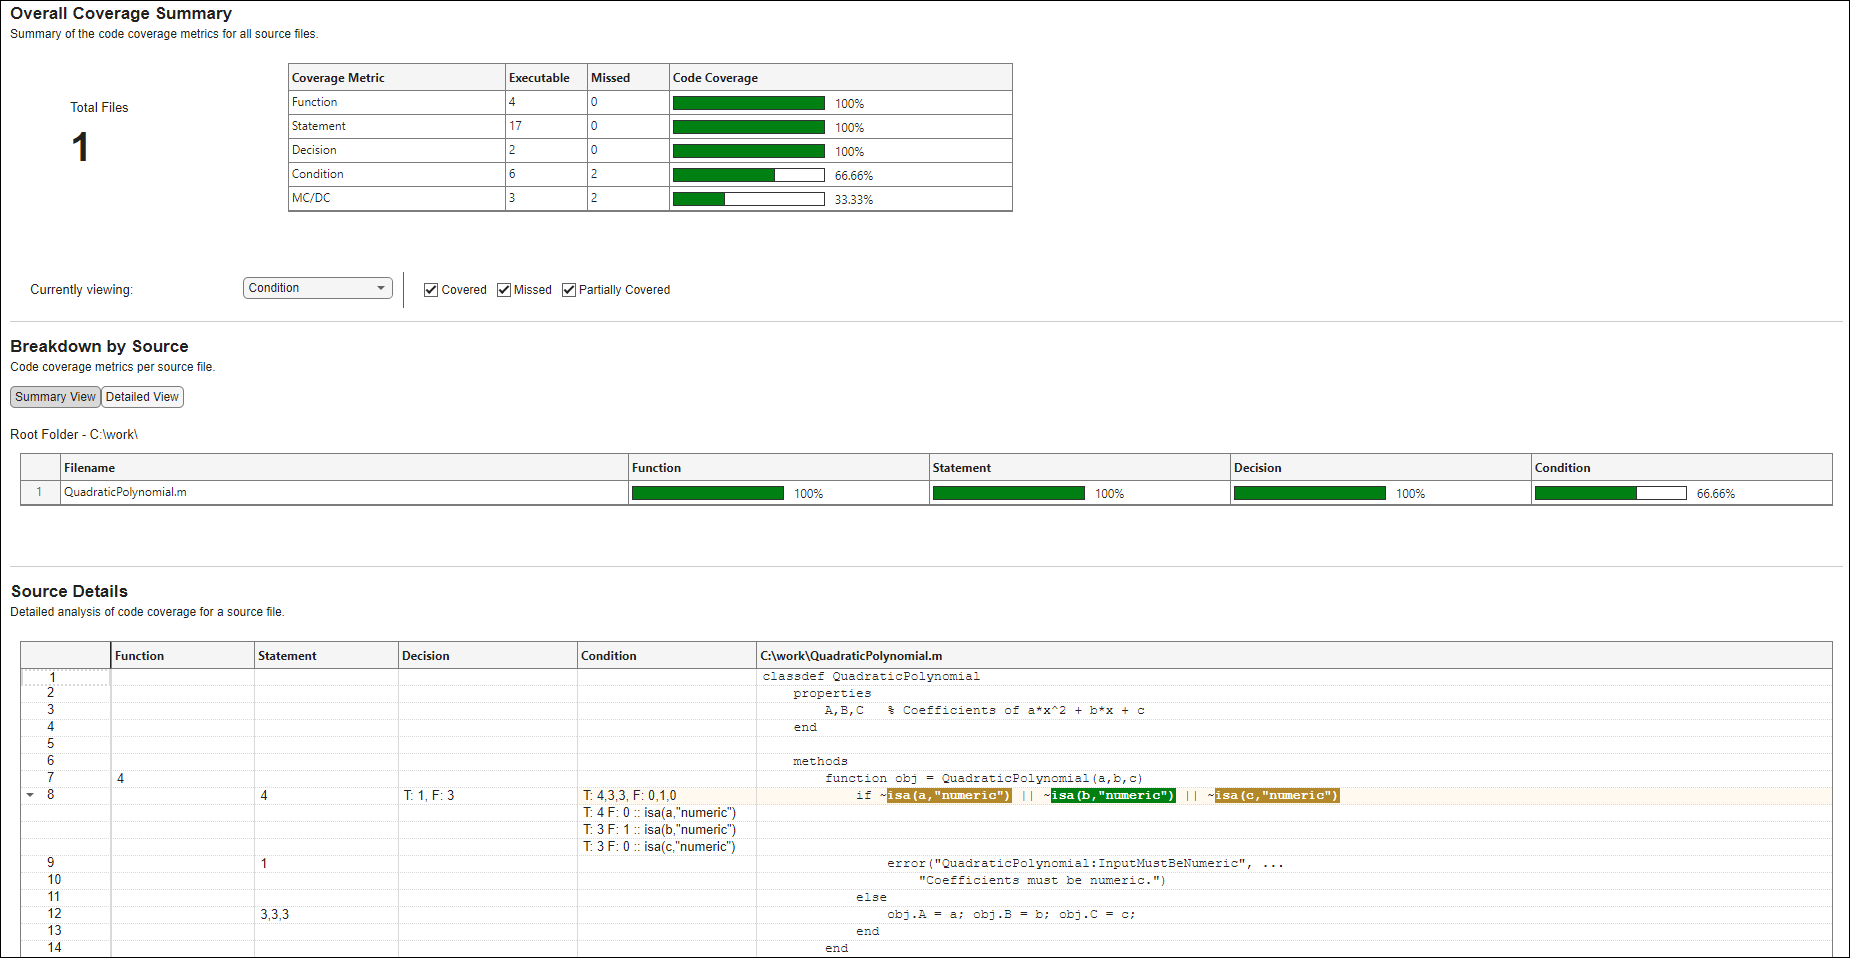 Condition coverage view of the interactive code coverage report, including the Overall Coverage Summary, Breakdown by Source, and Source Details sections